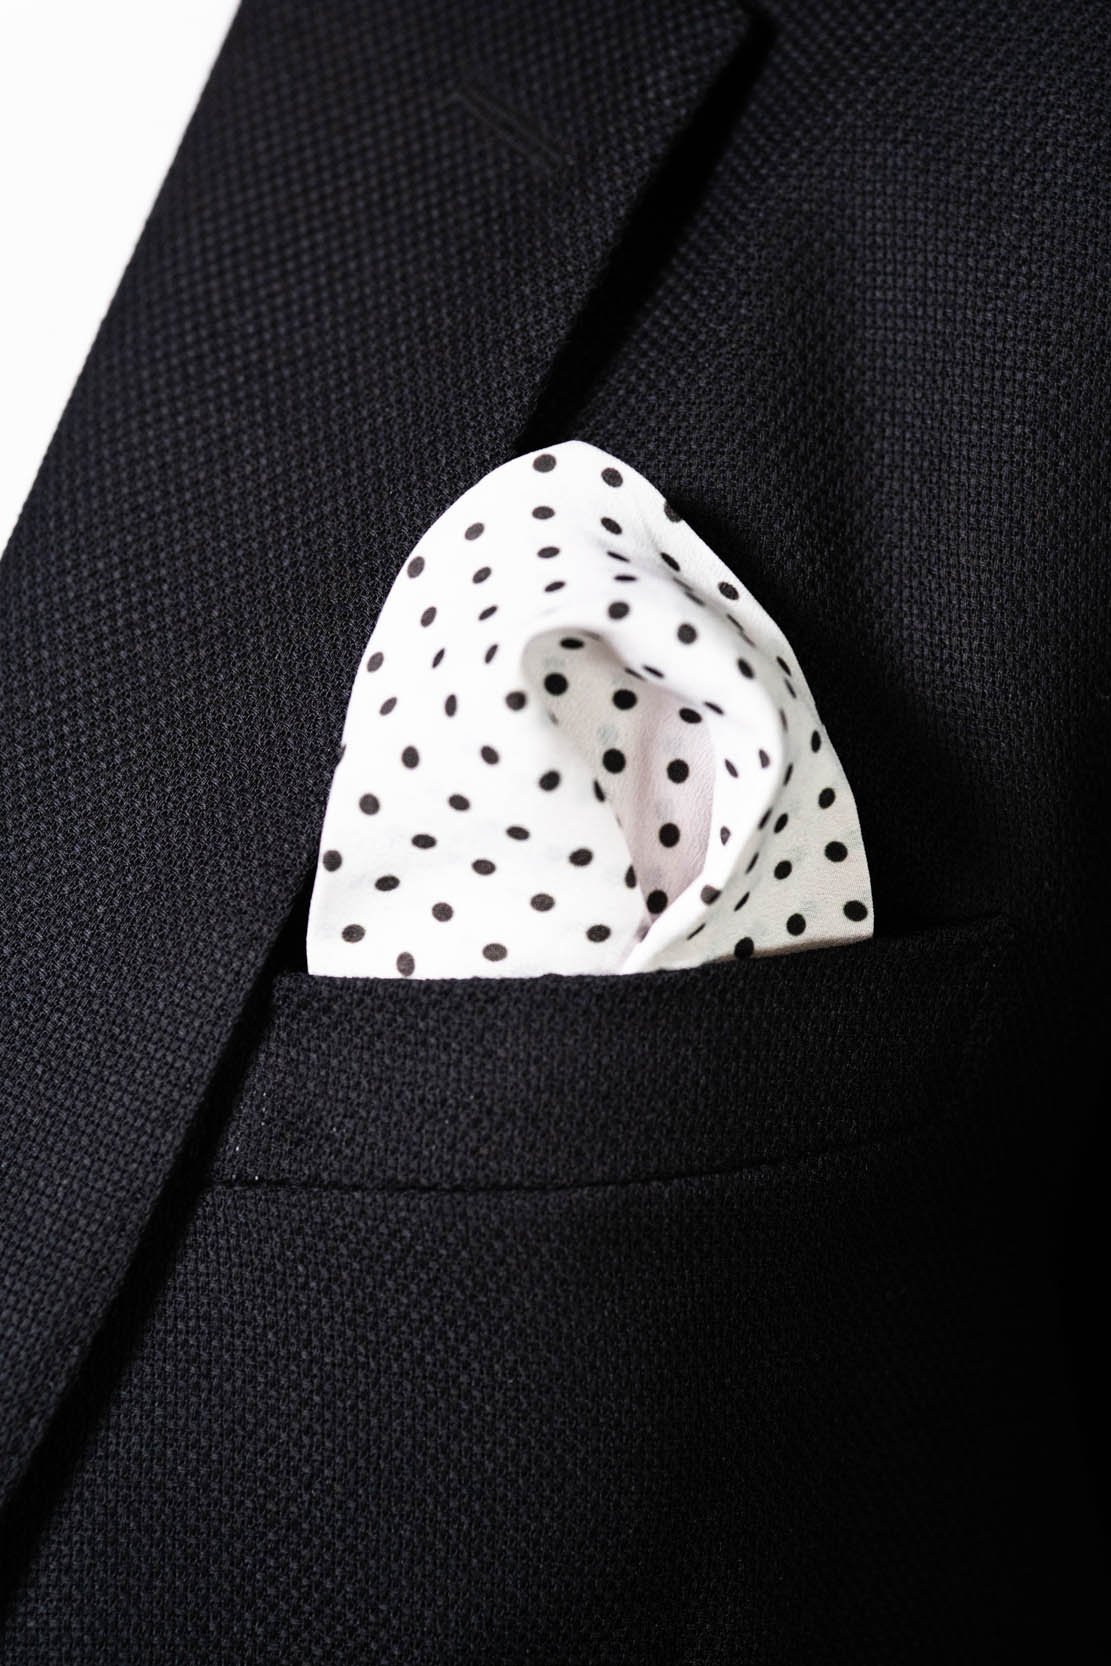 RARE CUT's Jet White Dots Pocket Square Worn in a Suit Jacket